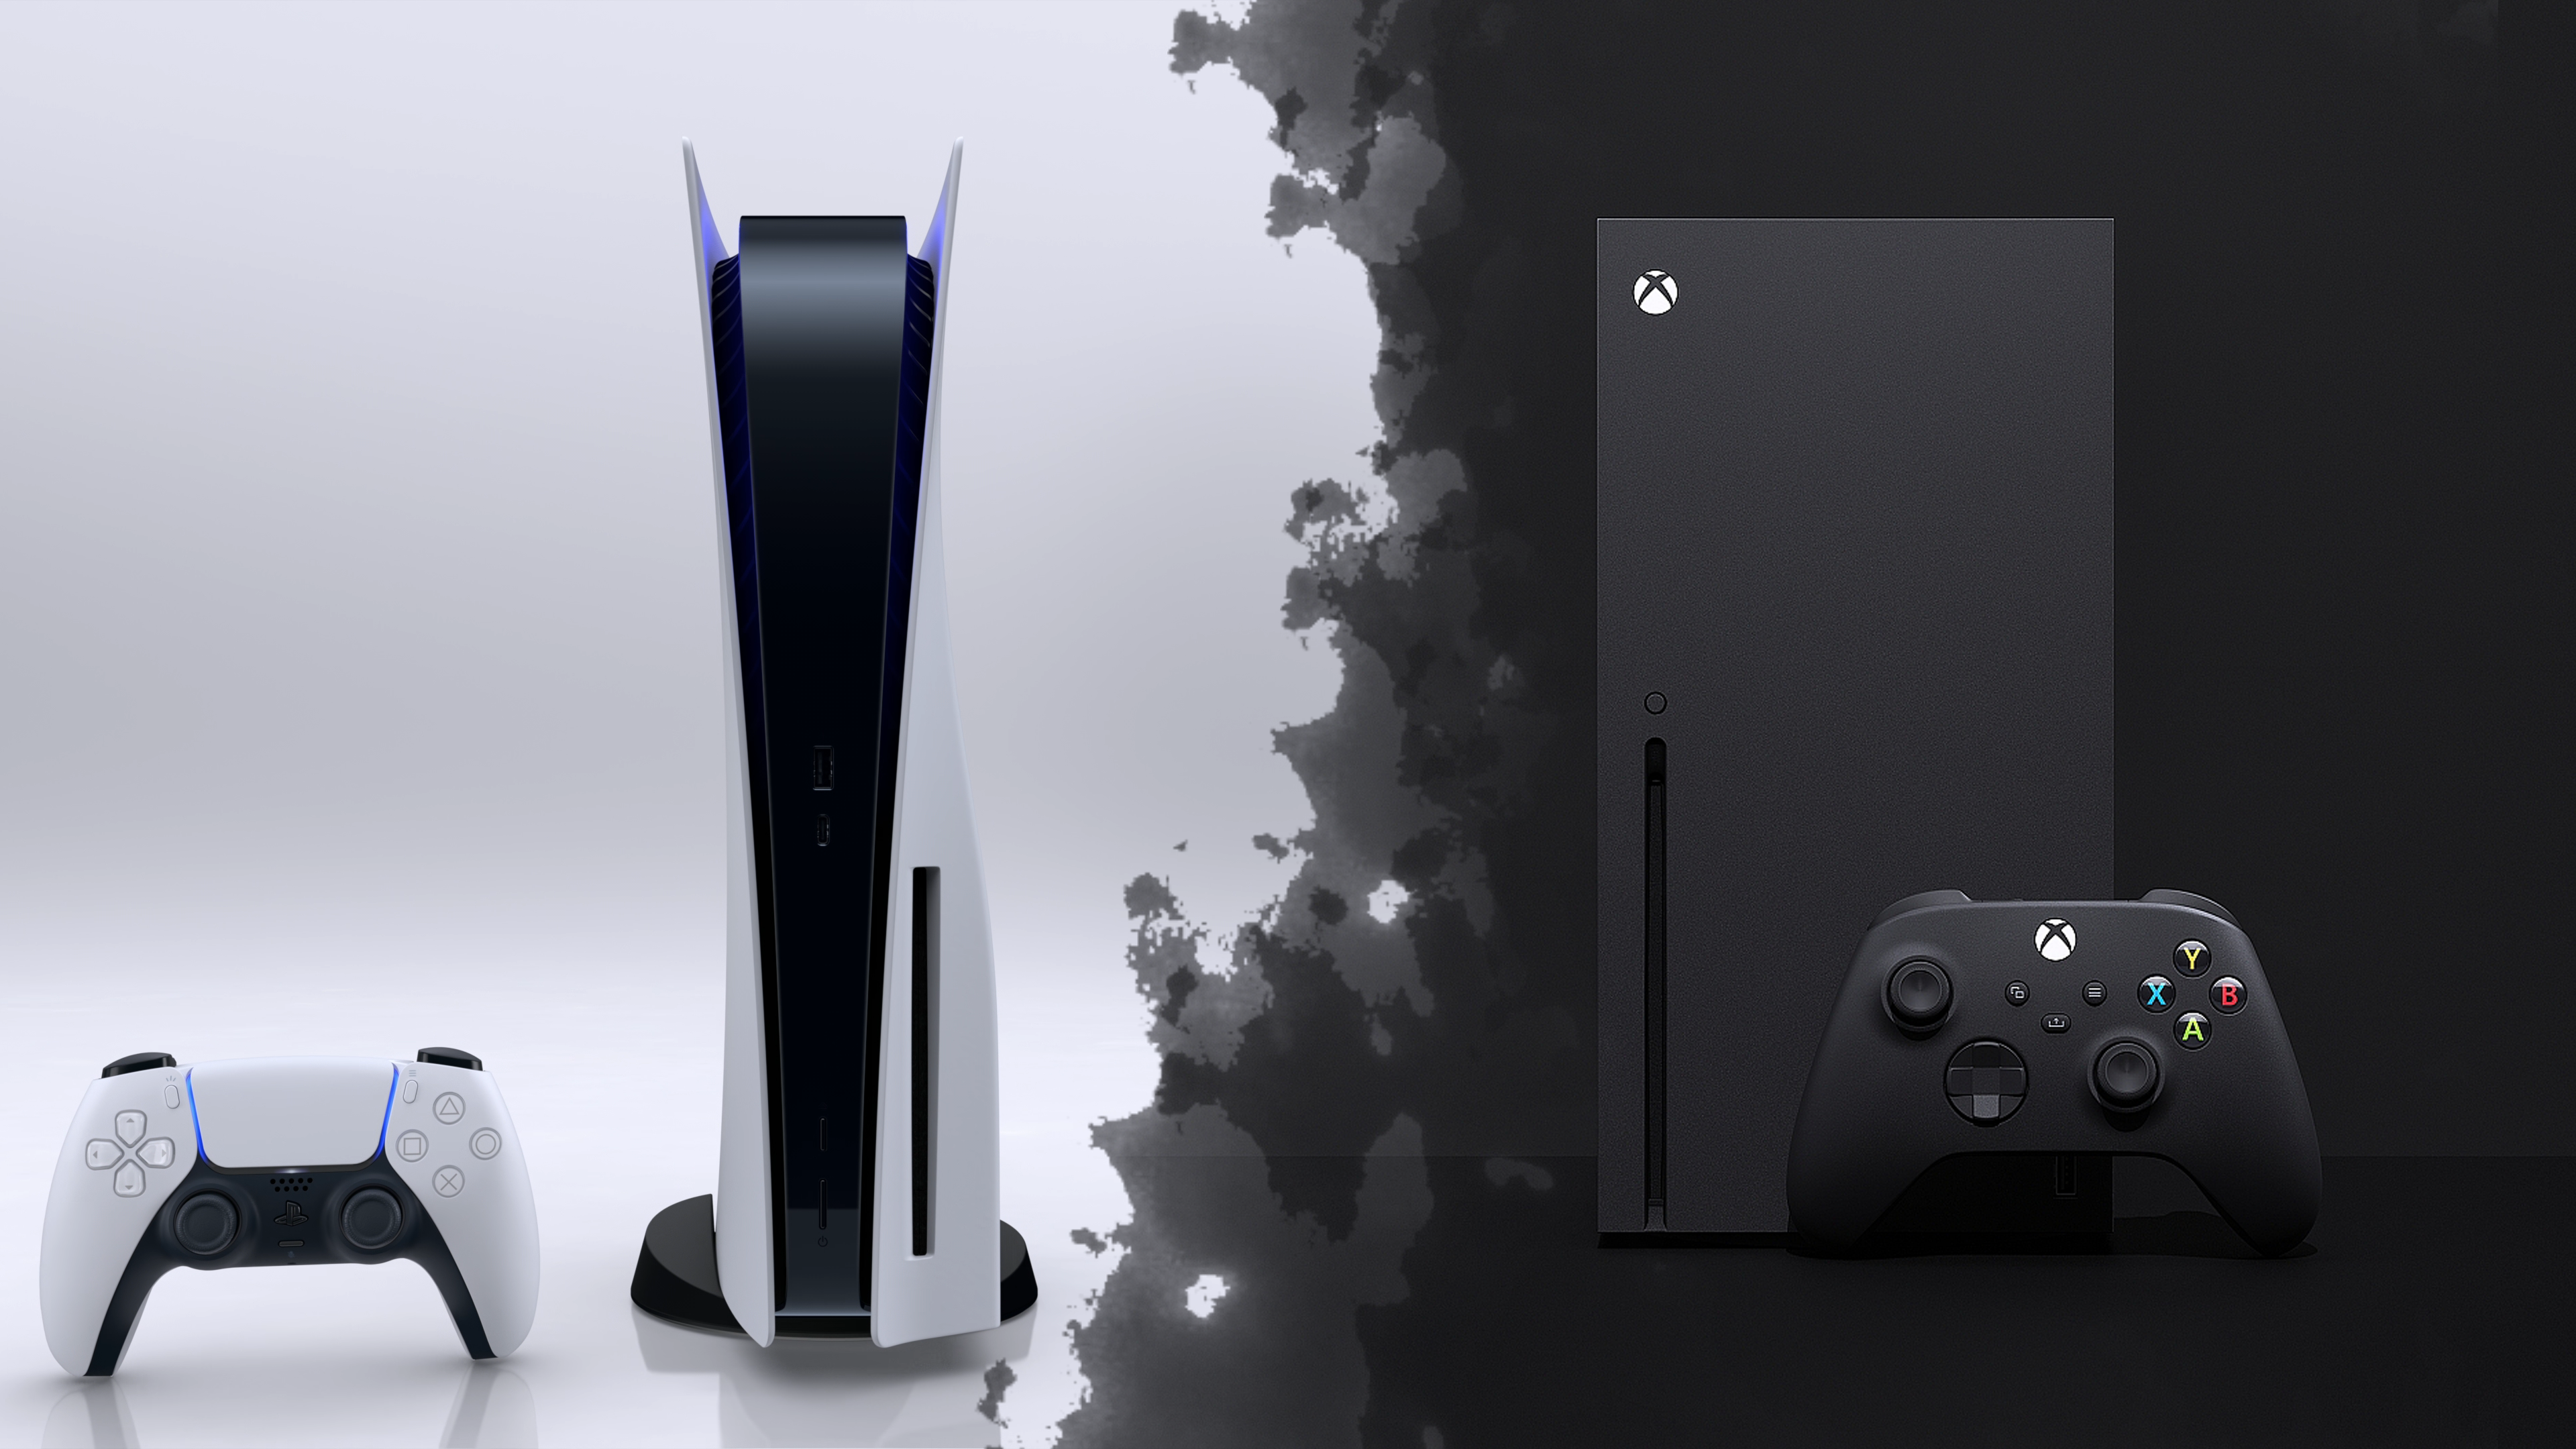 Sony, Microsoft – You Know It’s September Right? Any Next Gen News?